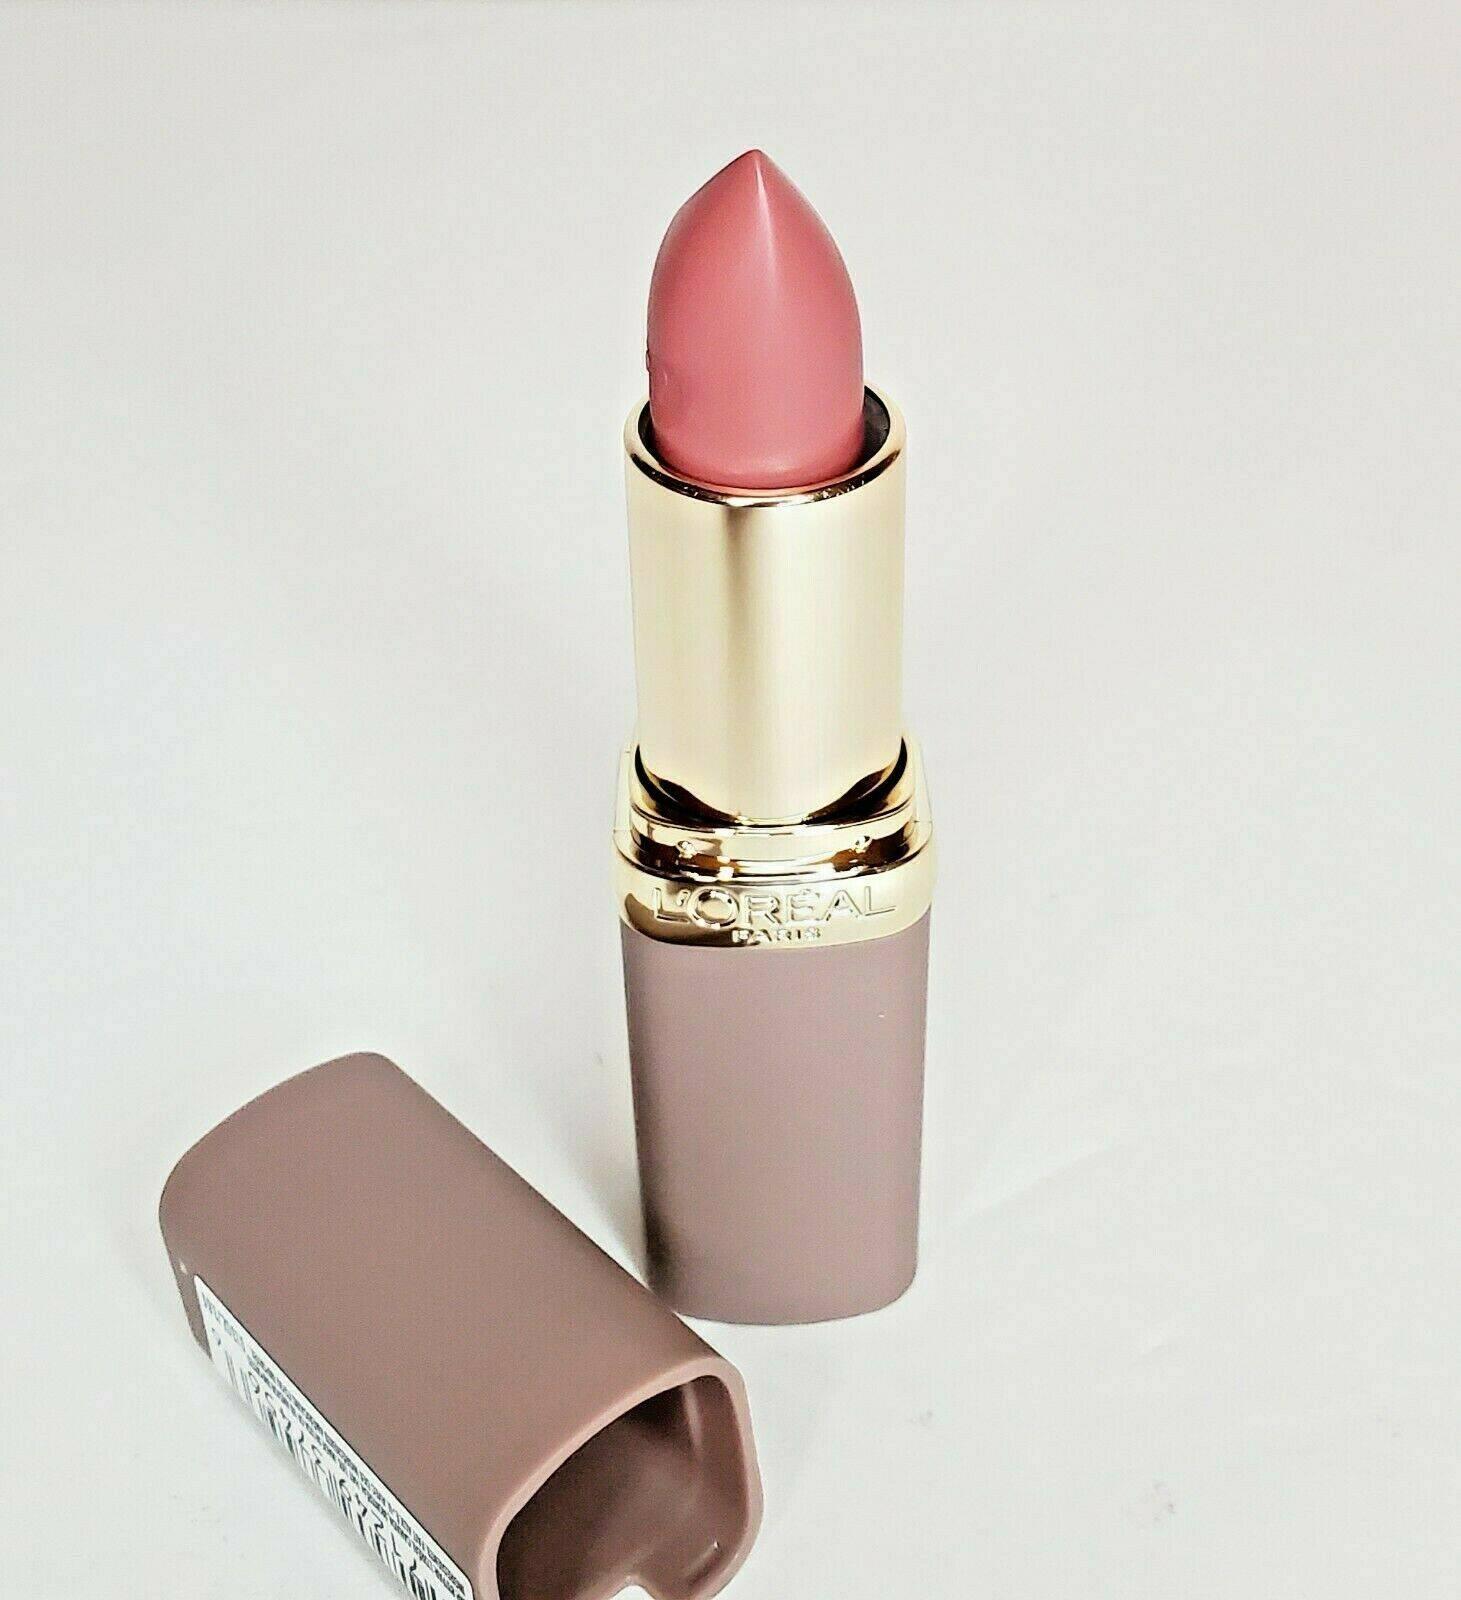 Loreal-Colour-Riche-Lipstick-977-Passionate-Pink-0-13Oz - African Beauty Online